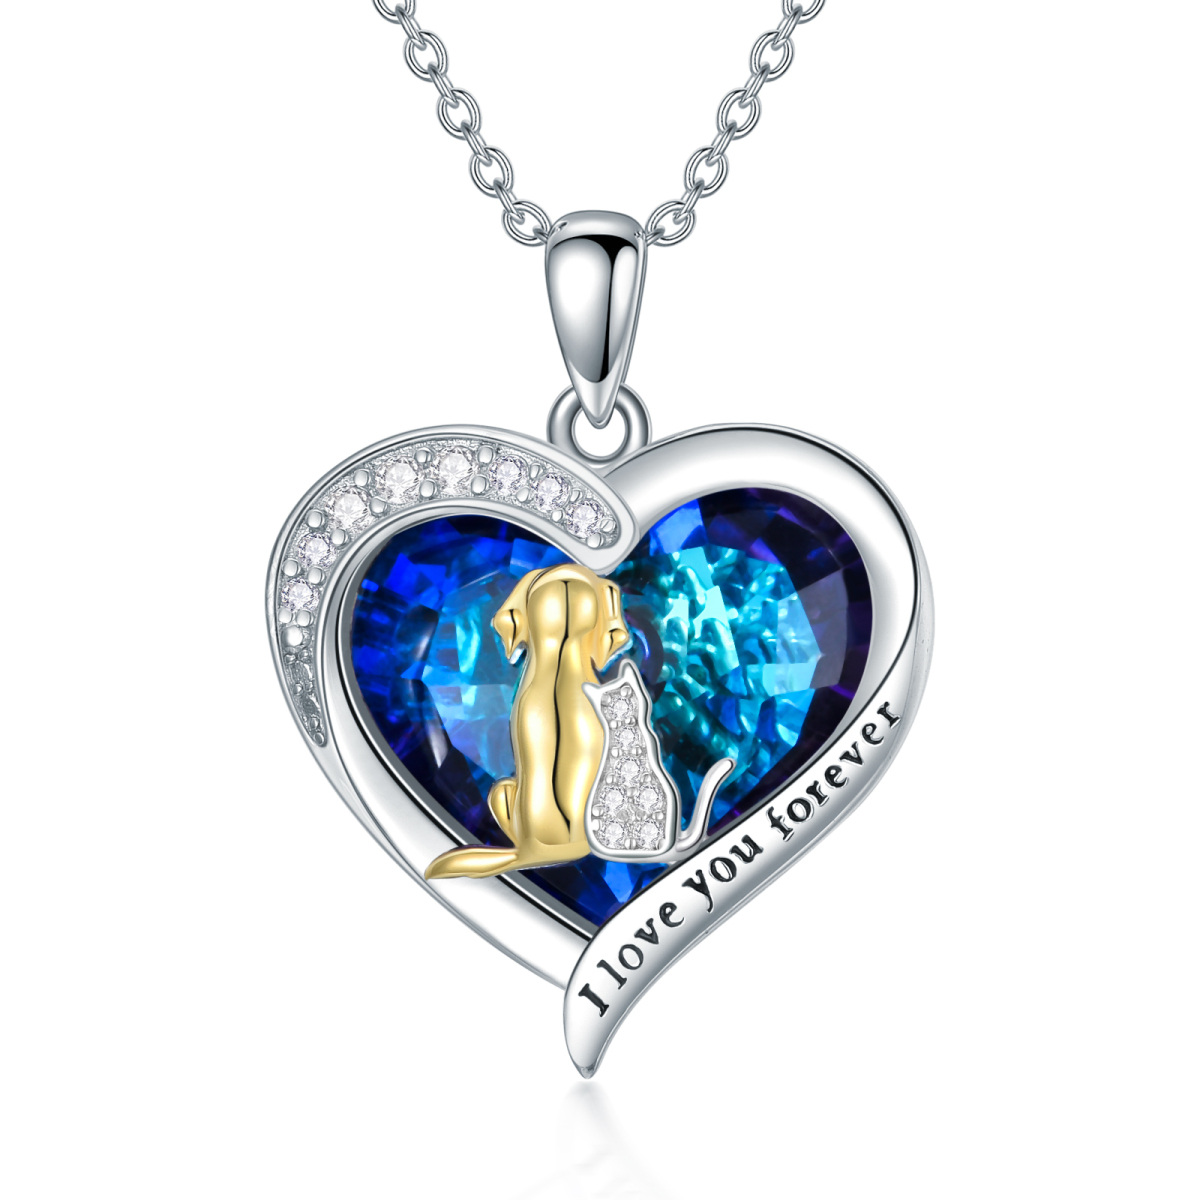 Sterling Silver Two-tone Heart Cat & Dog & Heart Crystal Pendant Necklace with Engraved Word-1